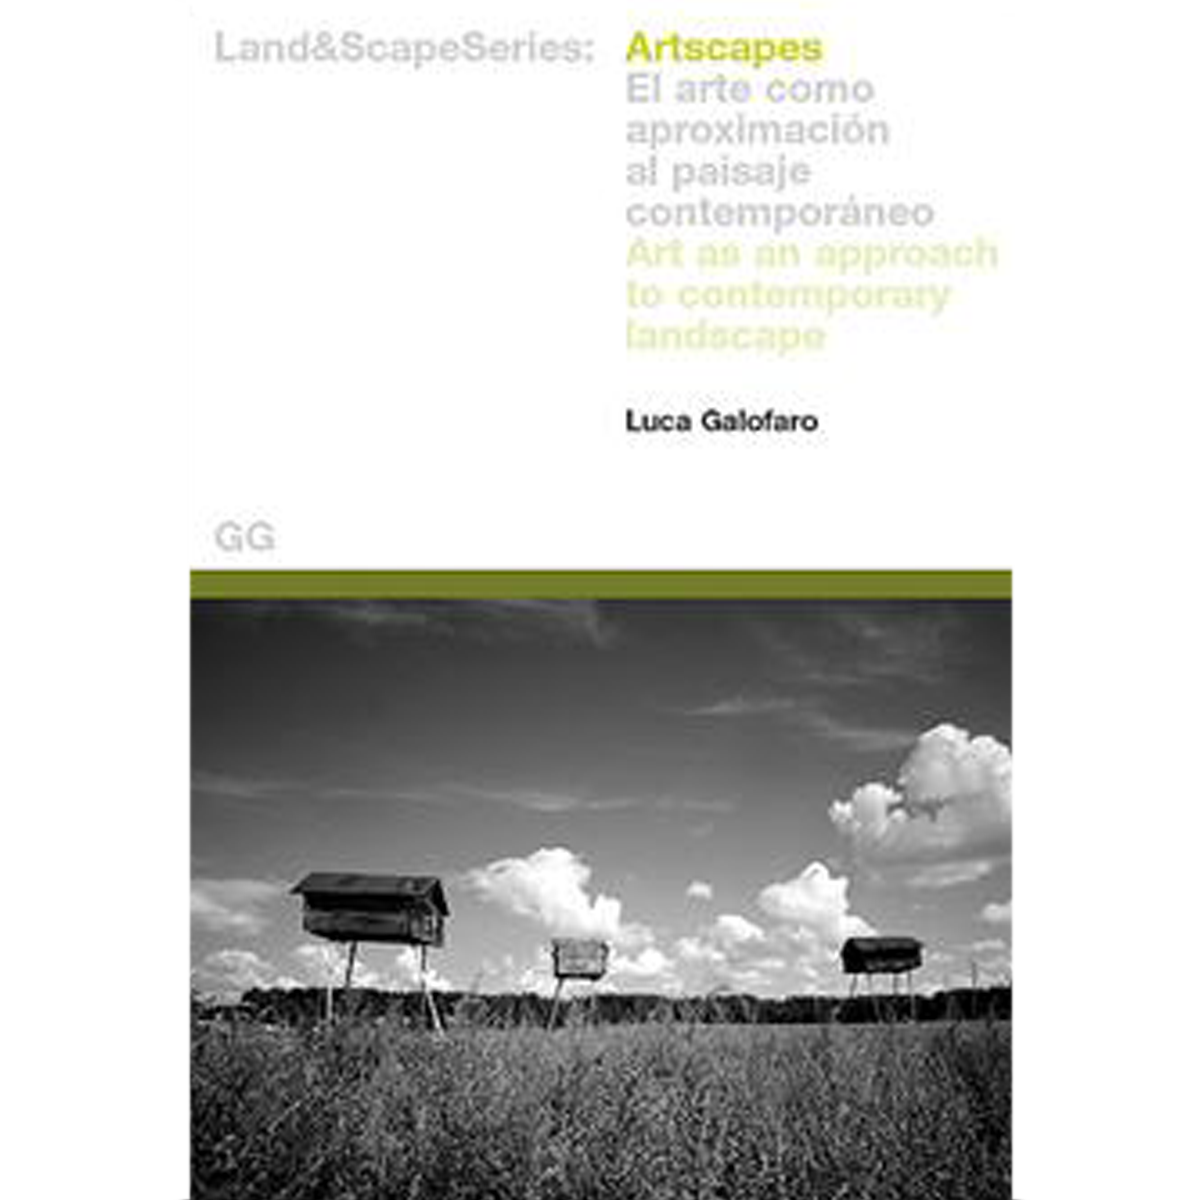 Land&Scapeseries: Artscapes